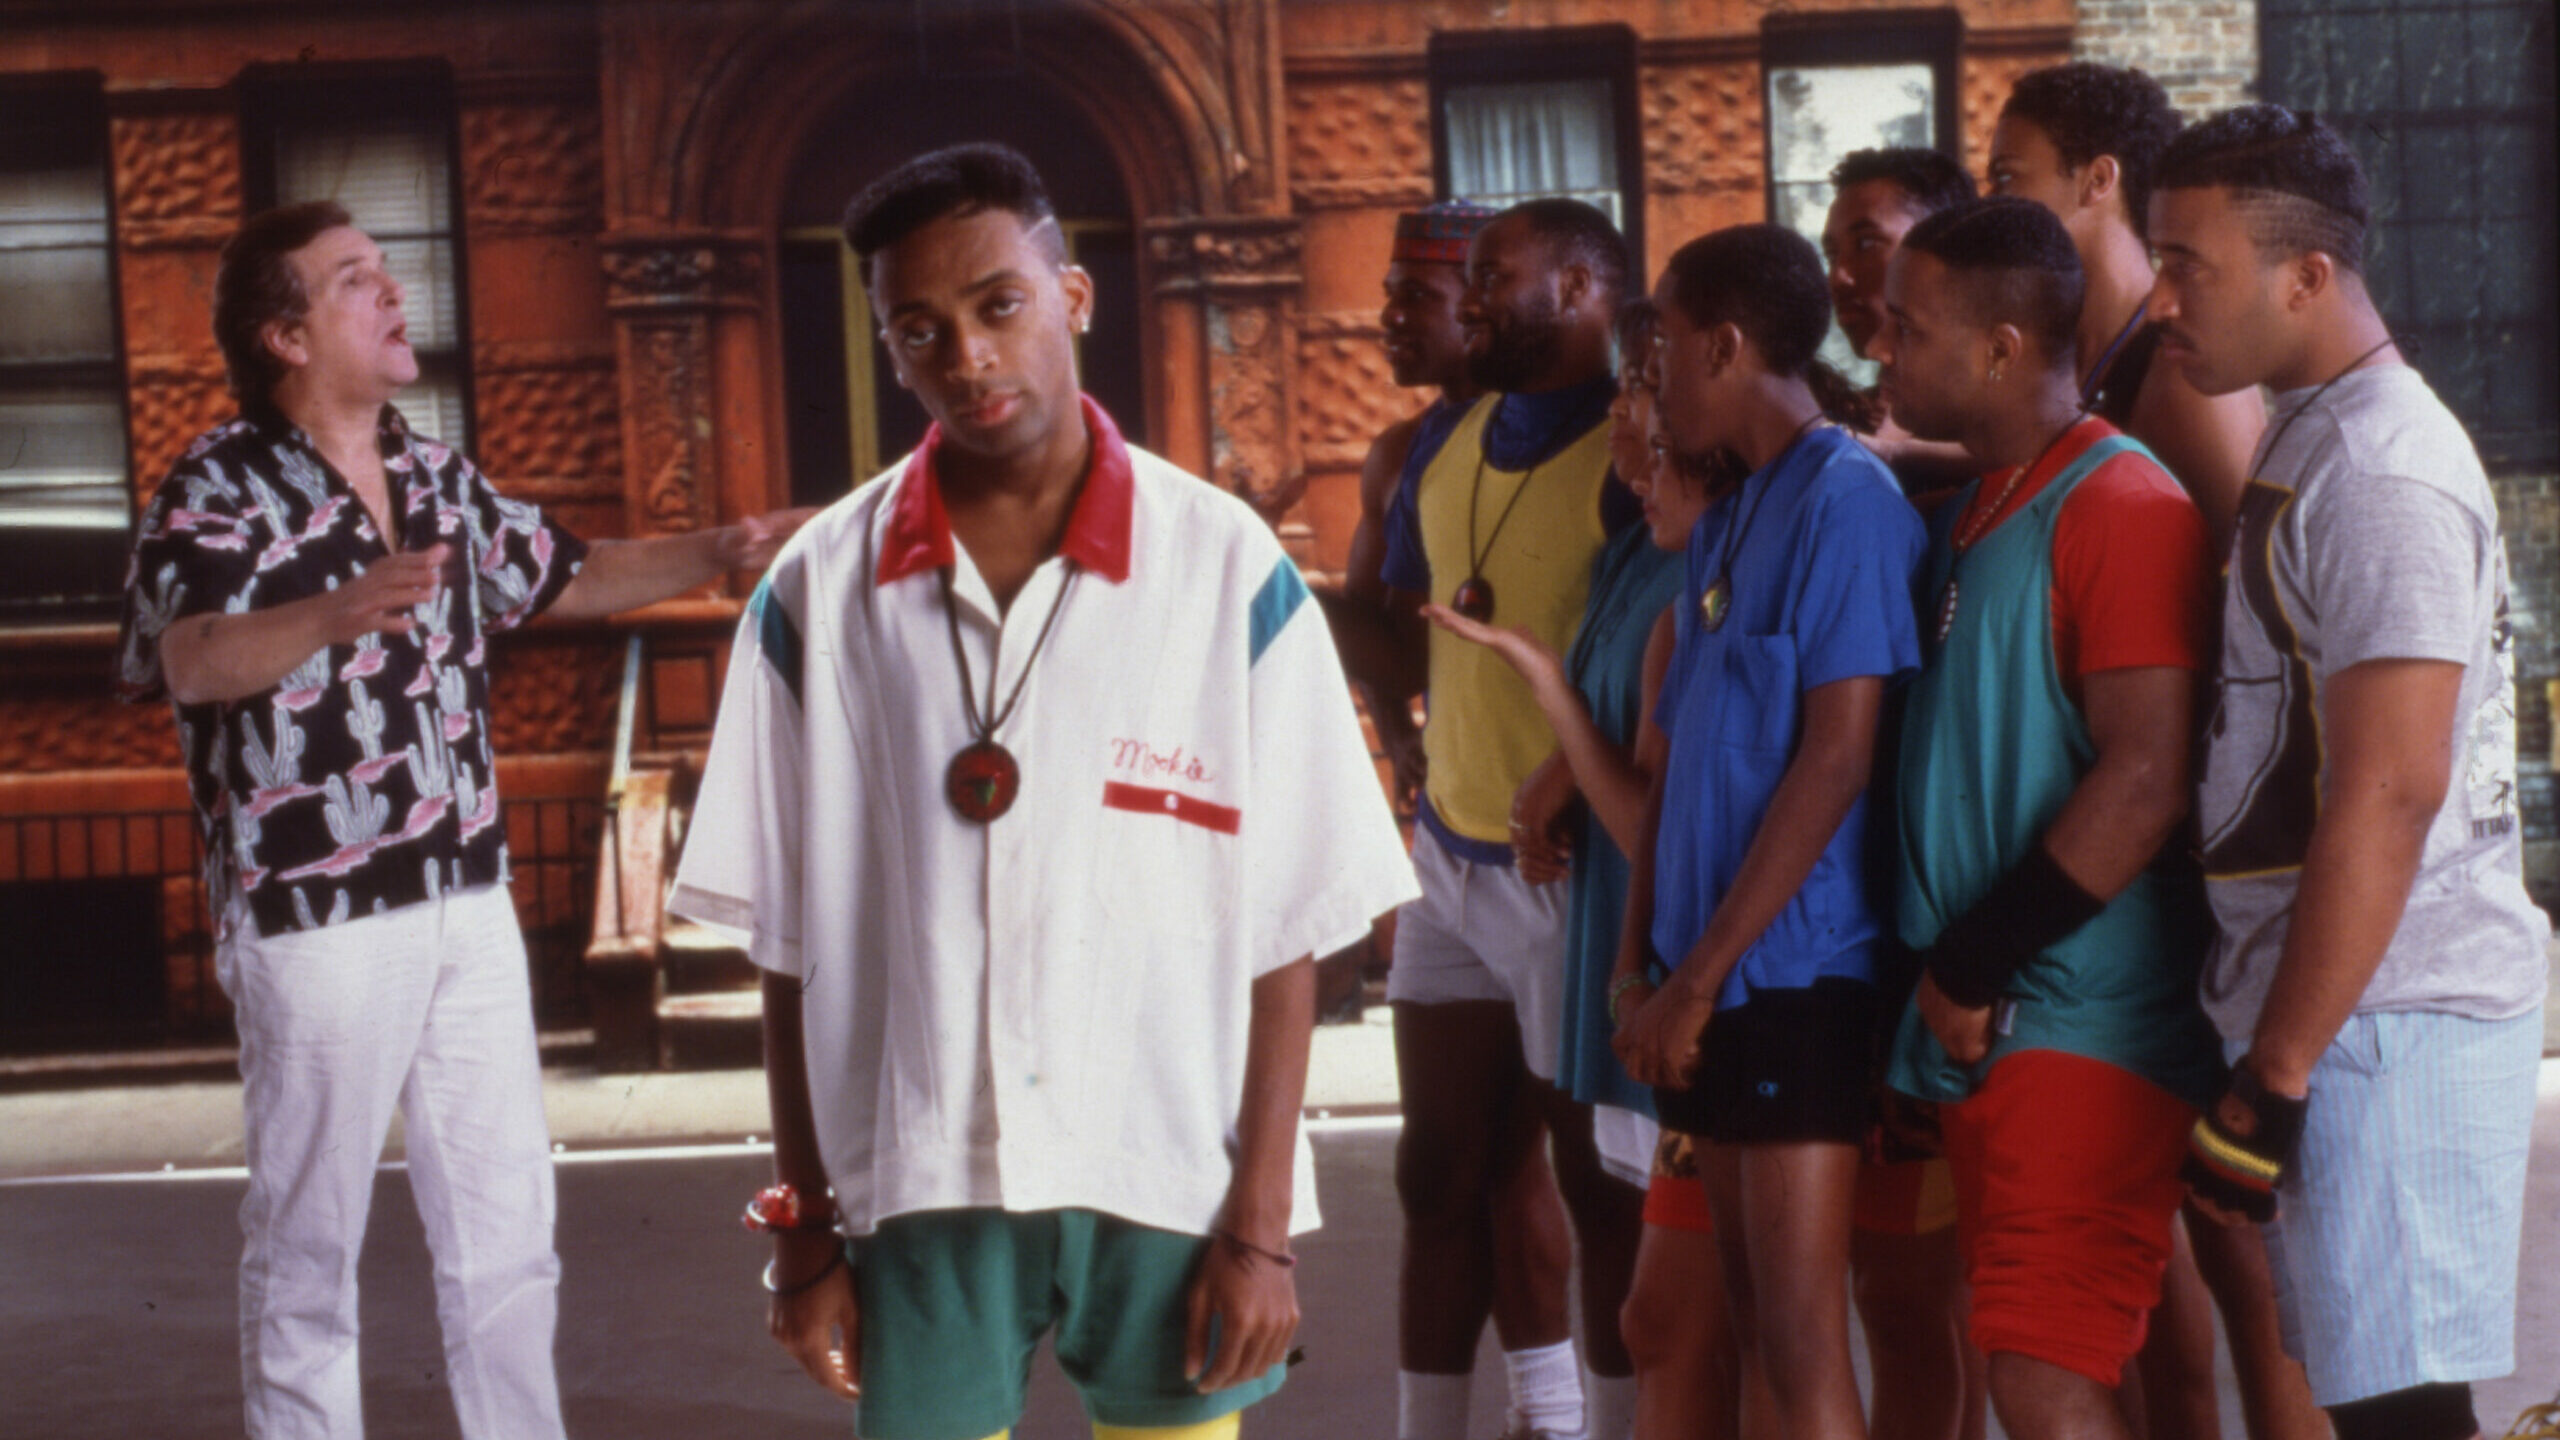 Spike Lee on "Do the Right Thing"